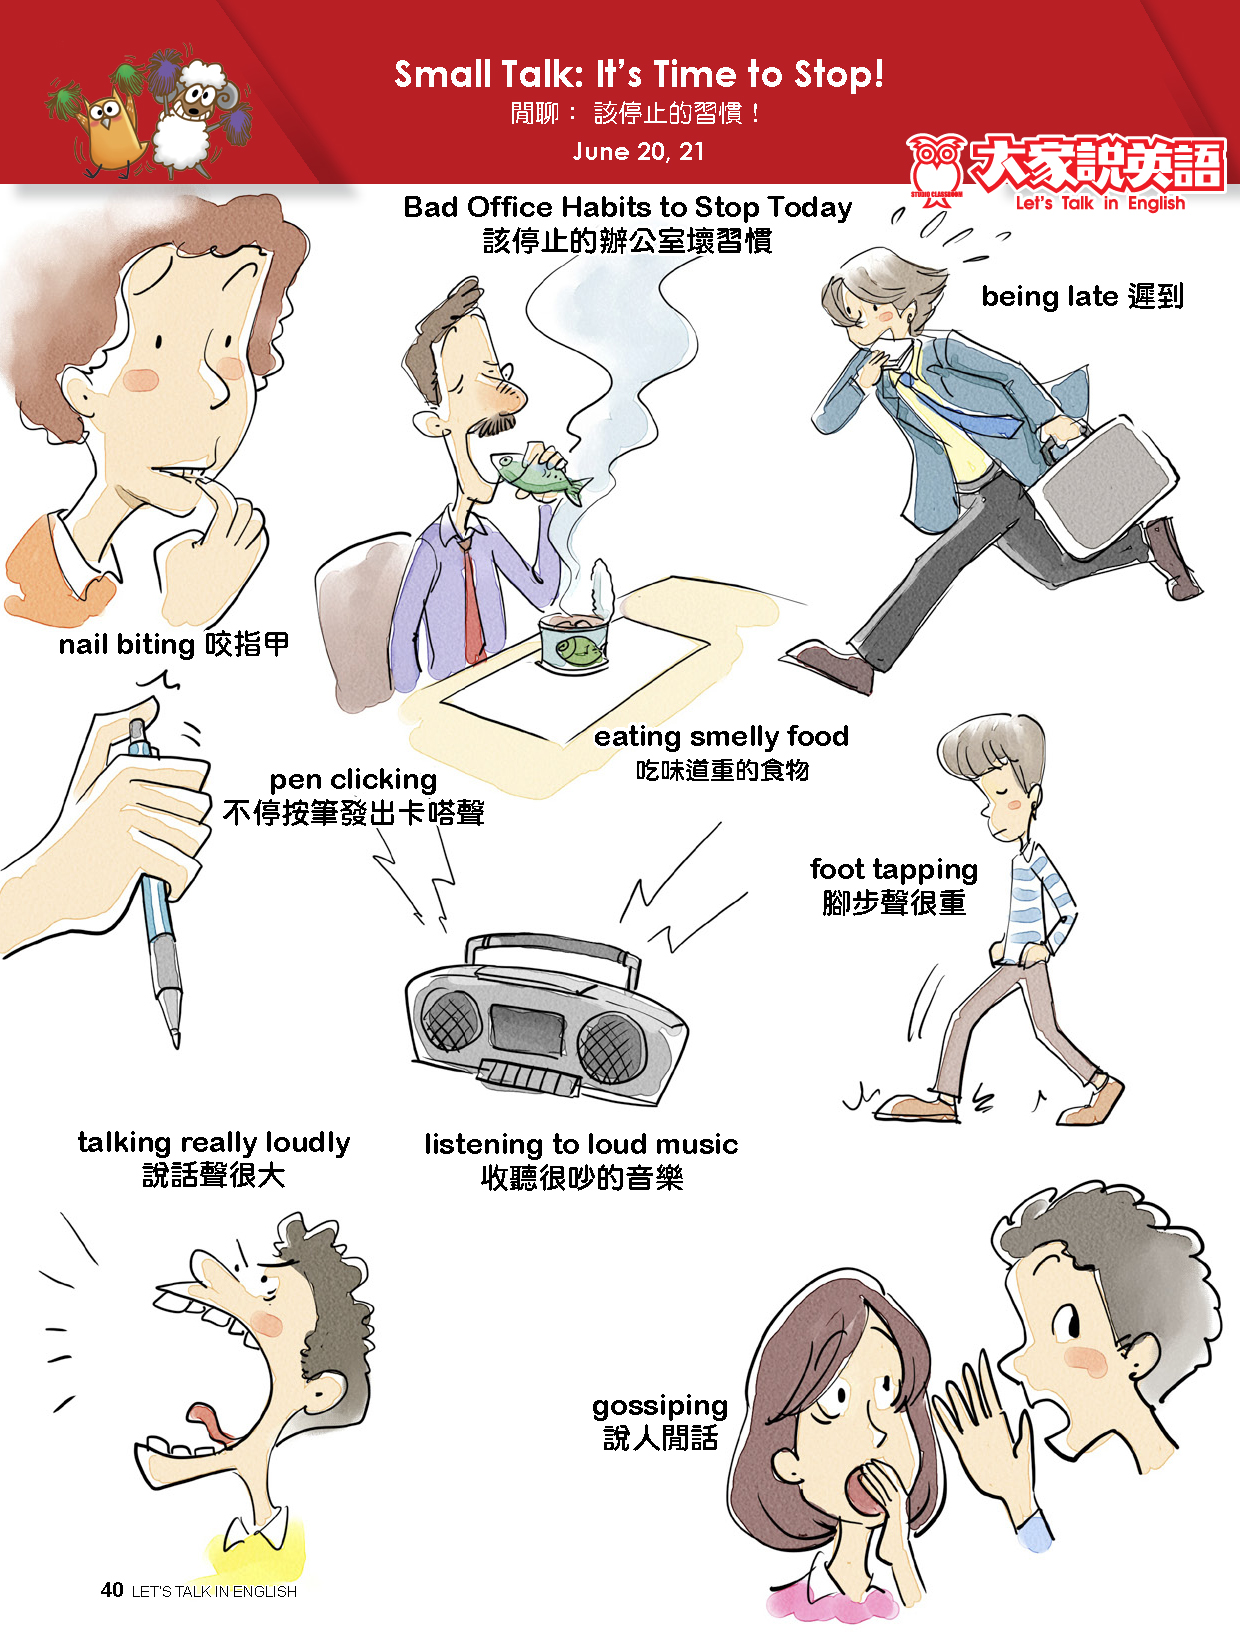 【Visual English】Small Talk: It’s time to Stop